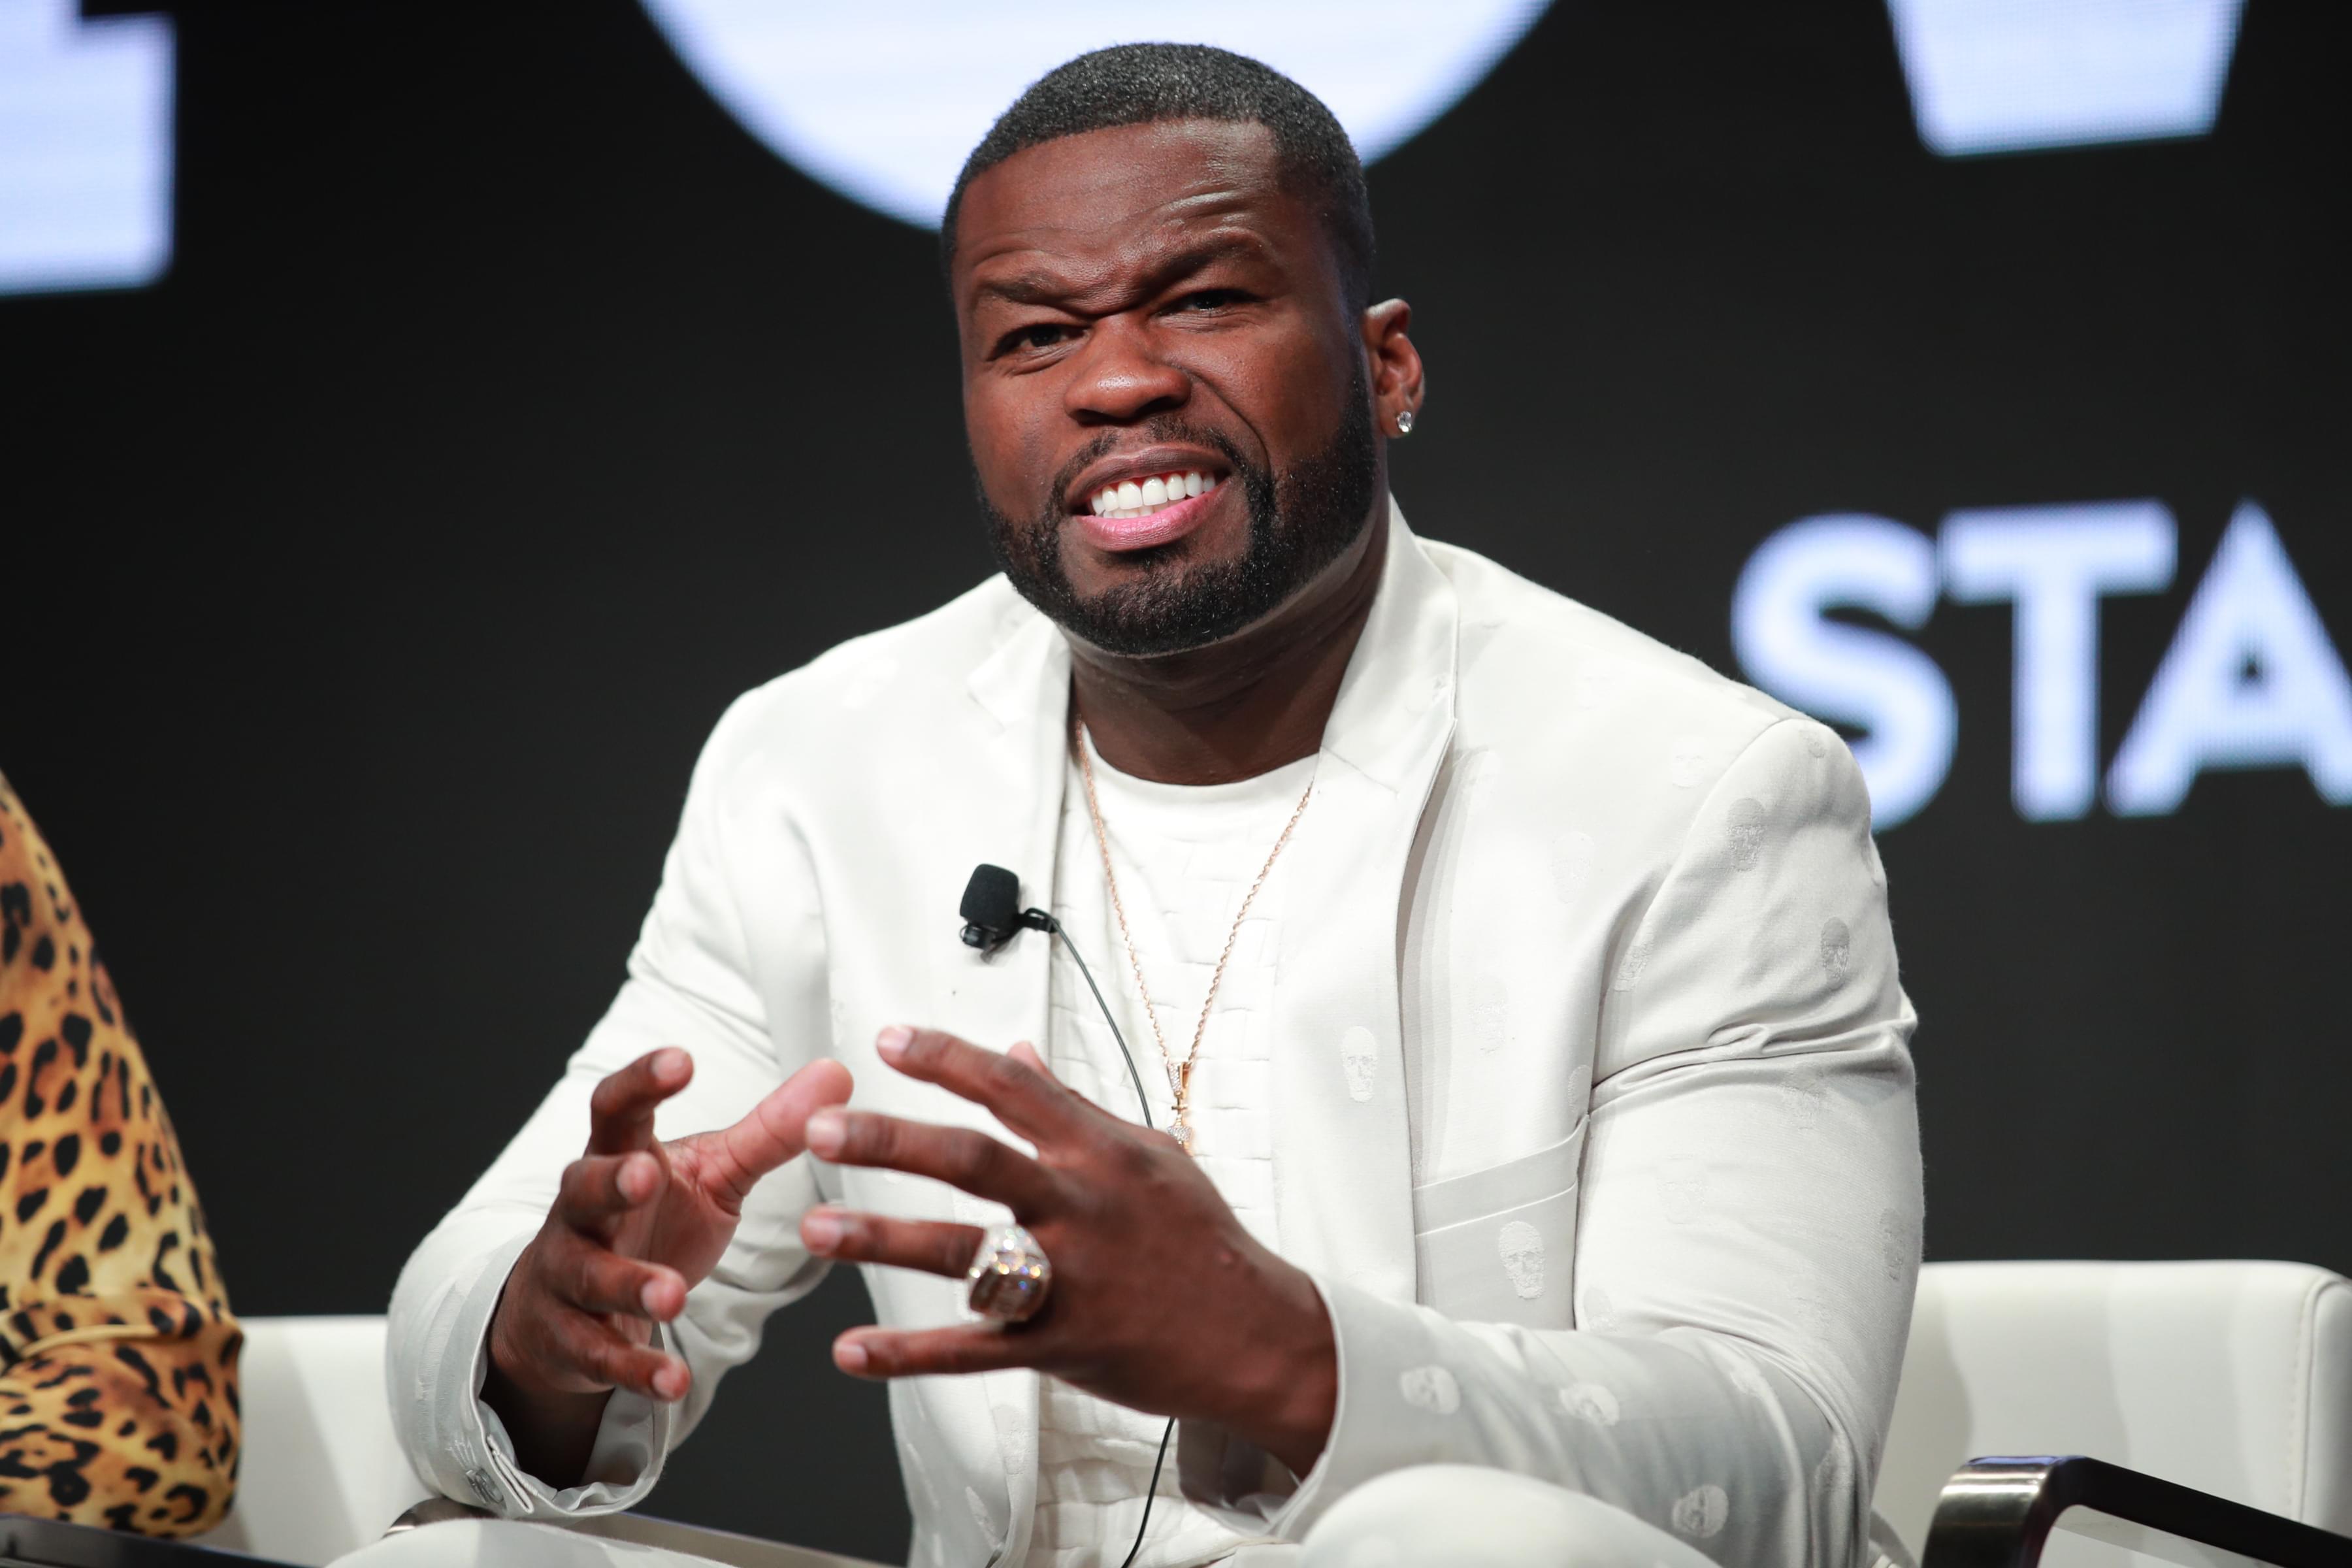 50 Cent’s ‘Black Mafia Family’ Drama Series Has Been Greenlighted By Starz